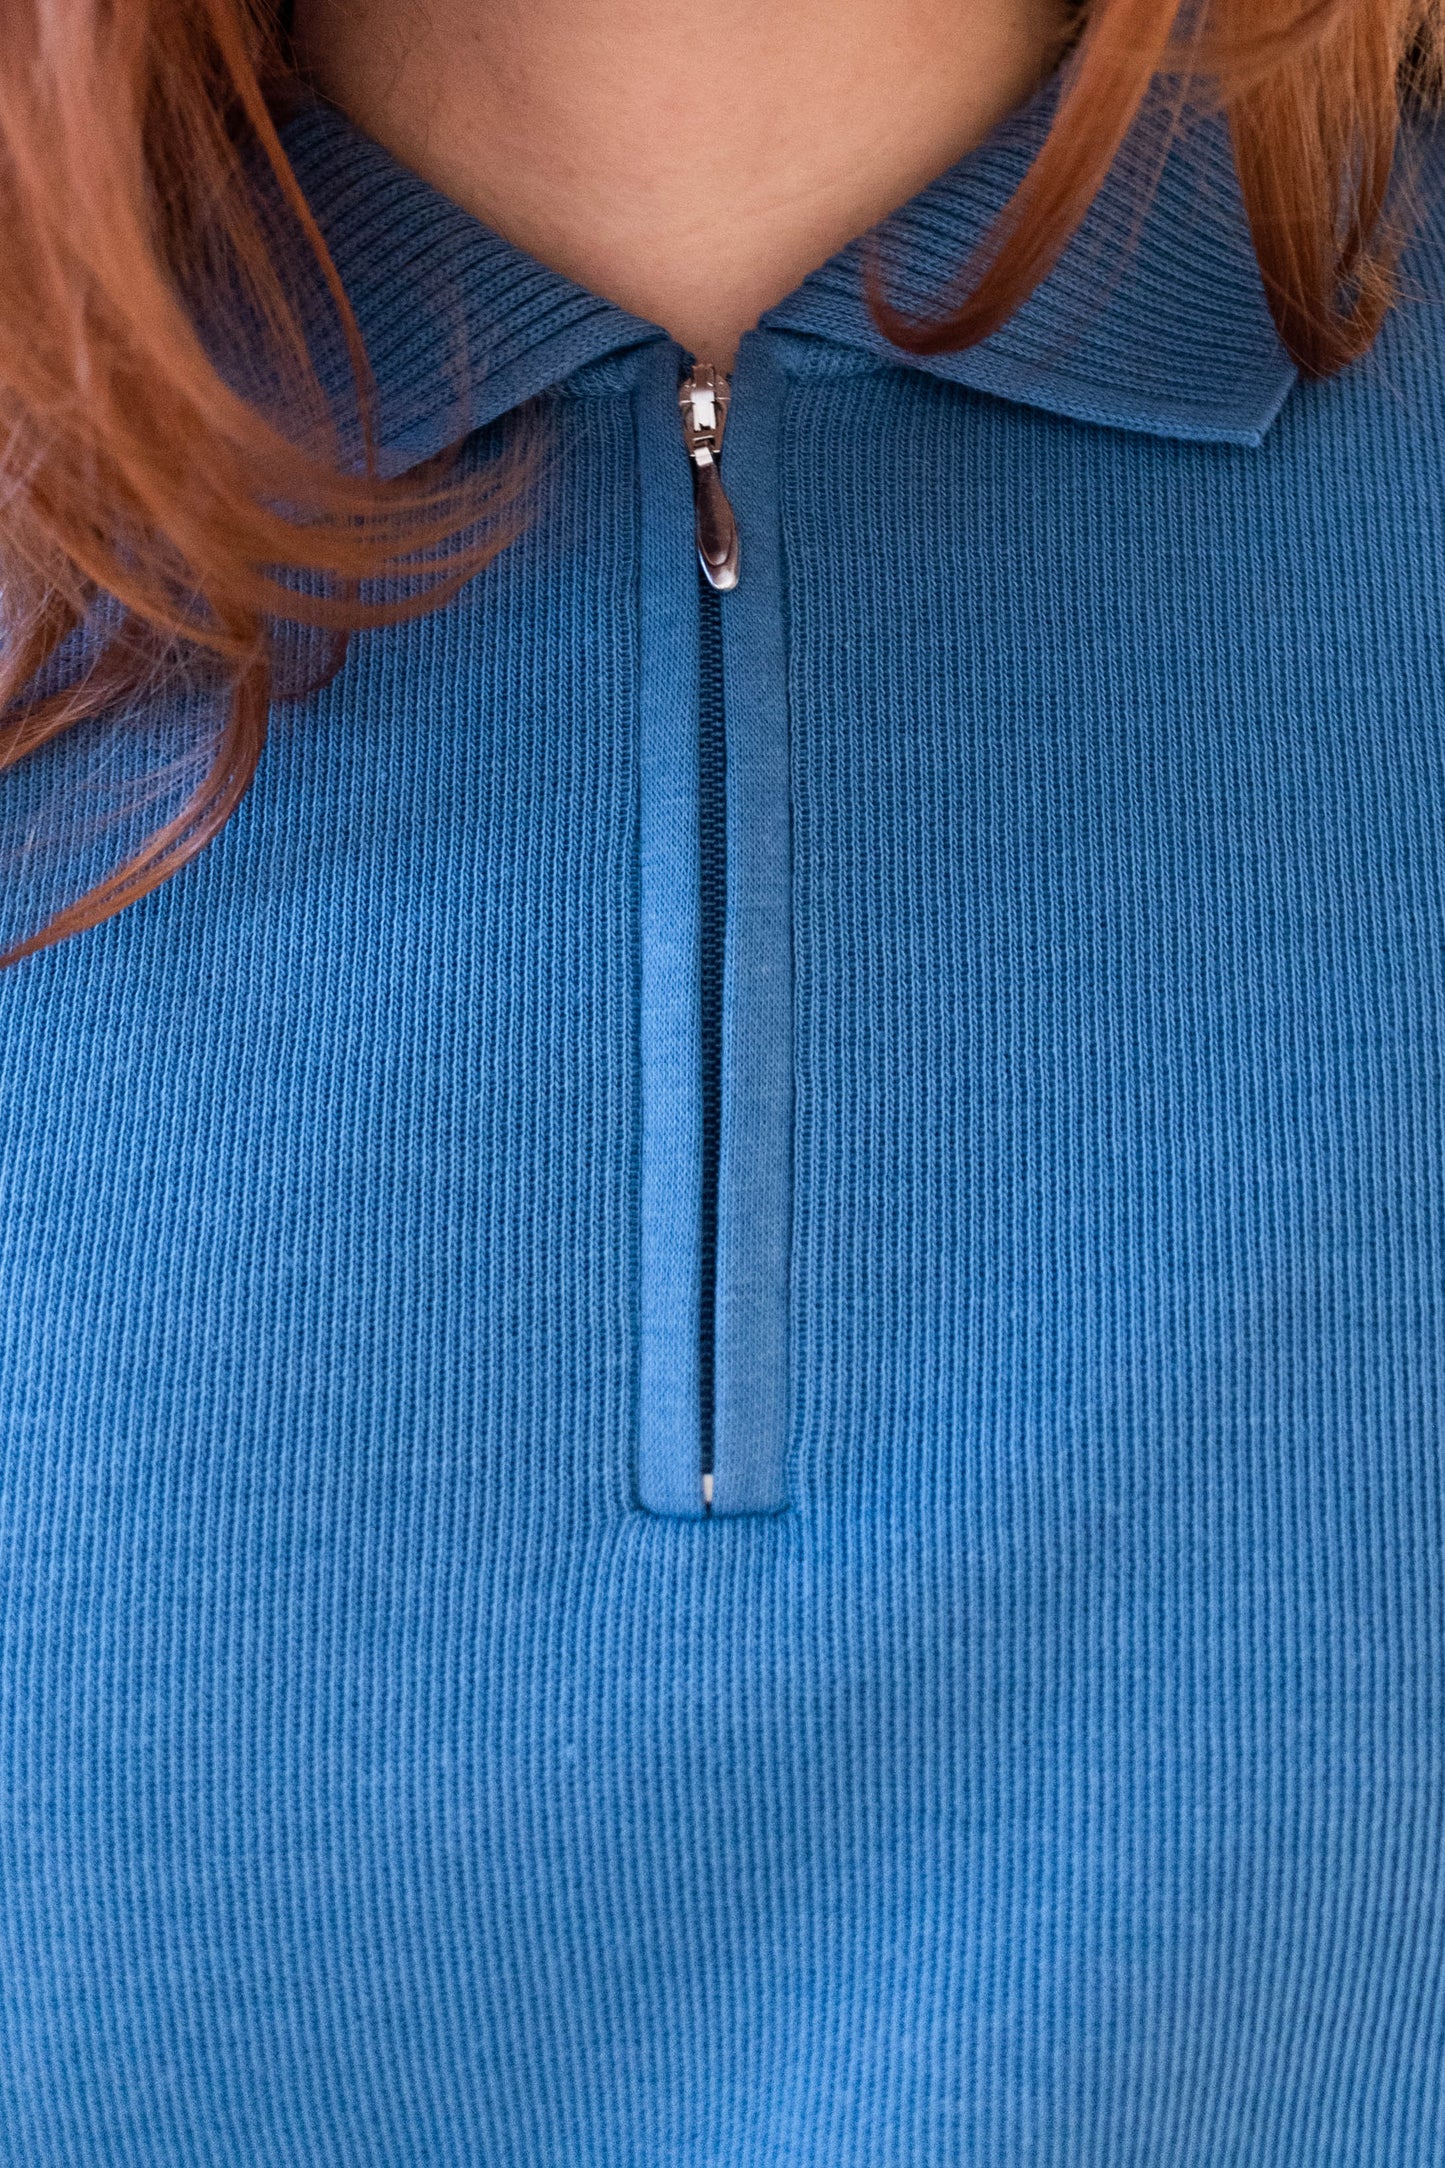 NEW IN! Blue sweater